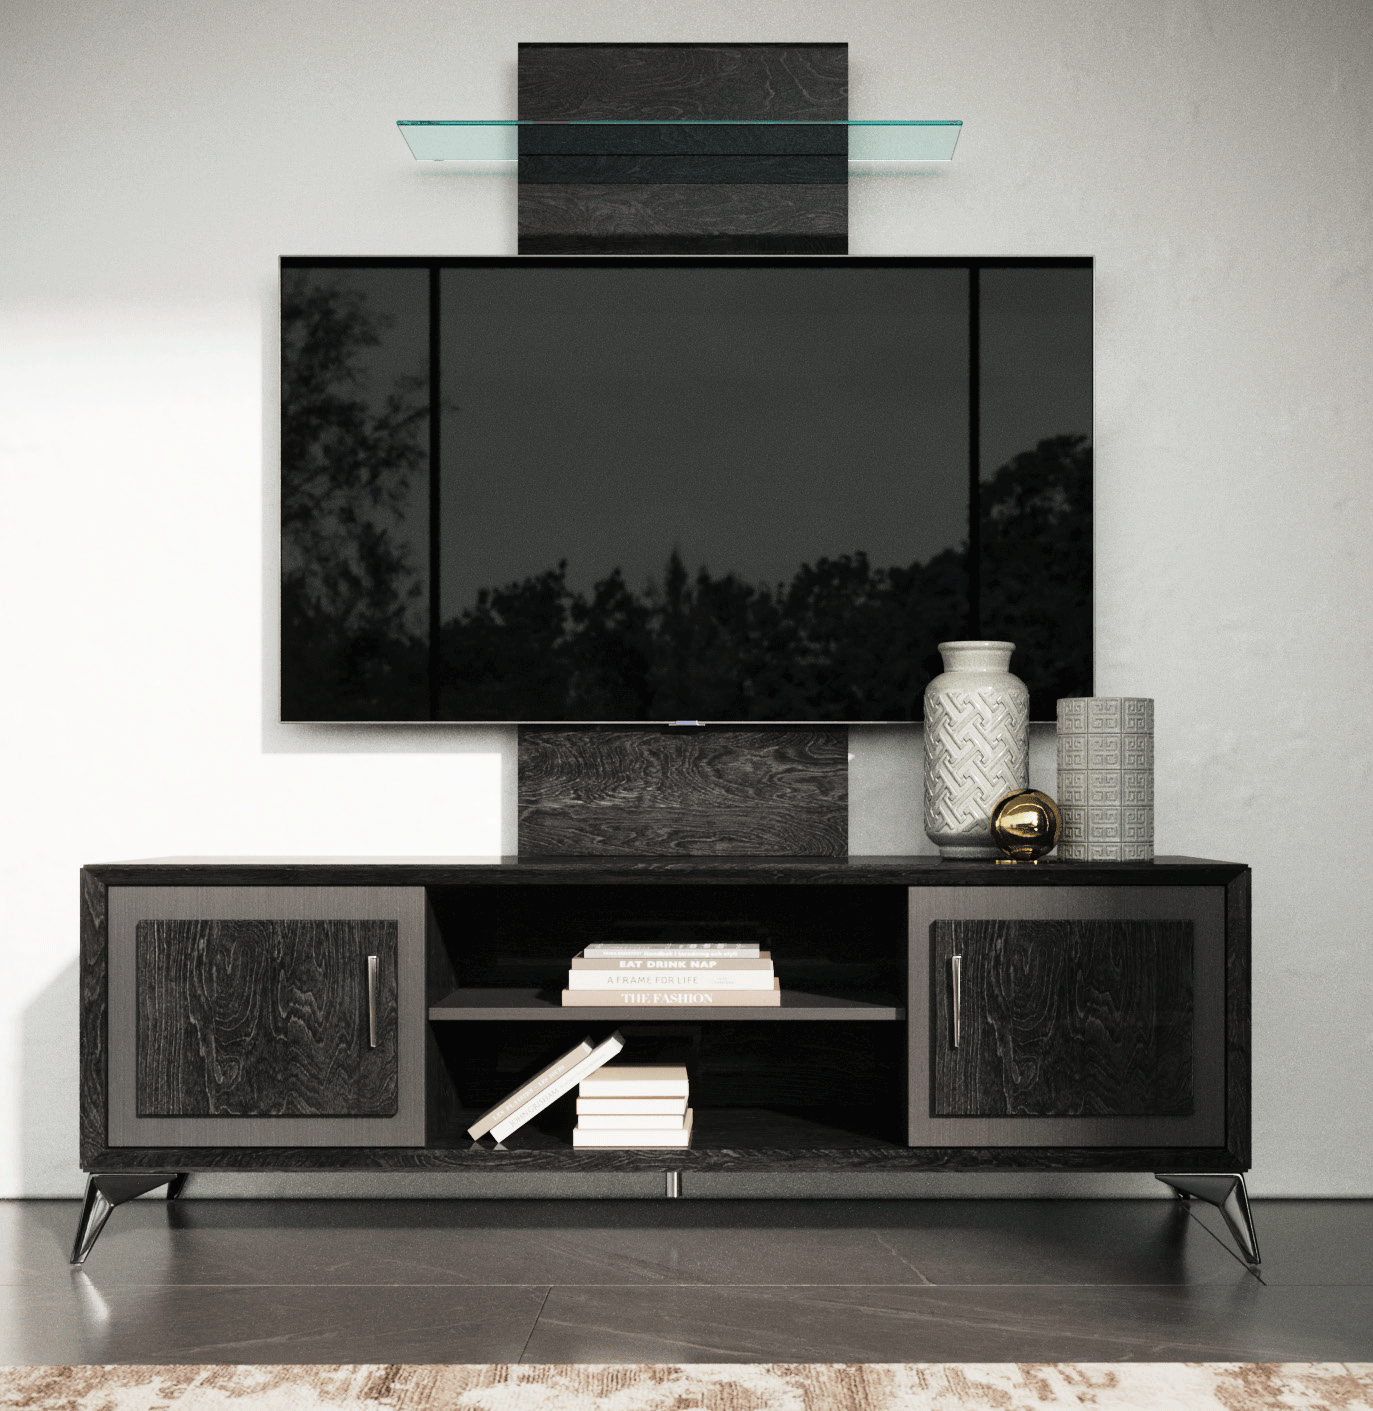 Brands Arredoclassic Living Room, Italy Krystal TV Cabinet + Wall Panel w/ Led light